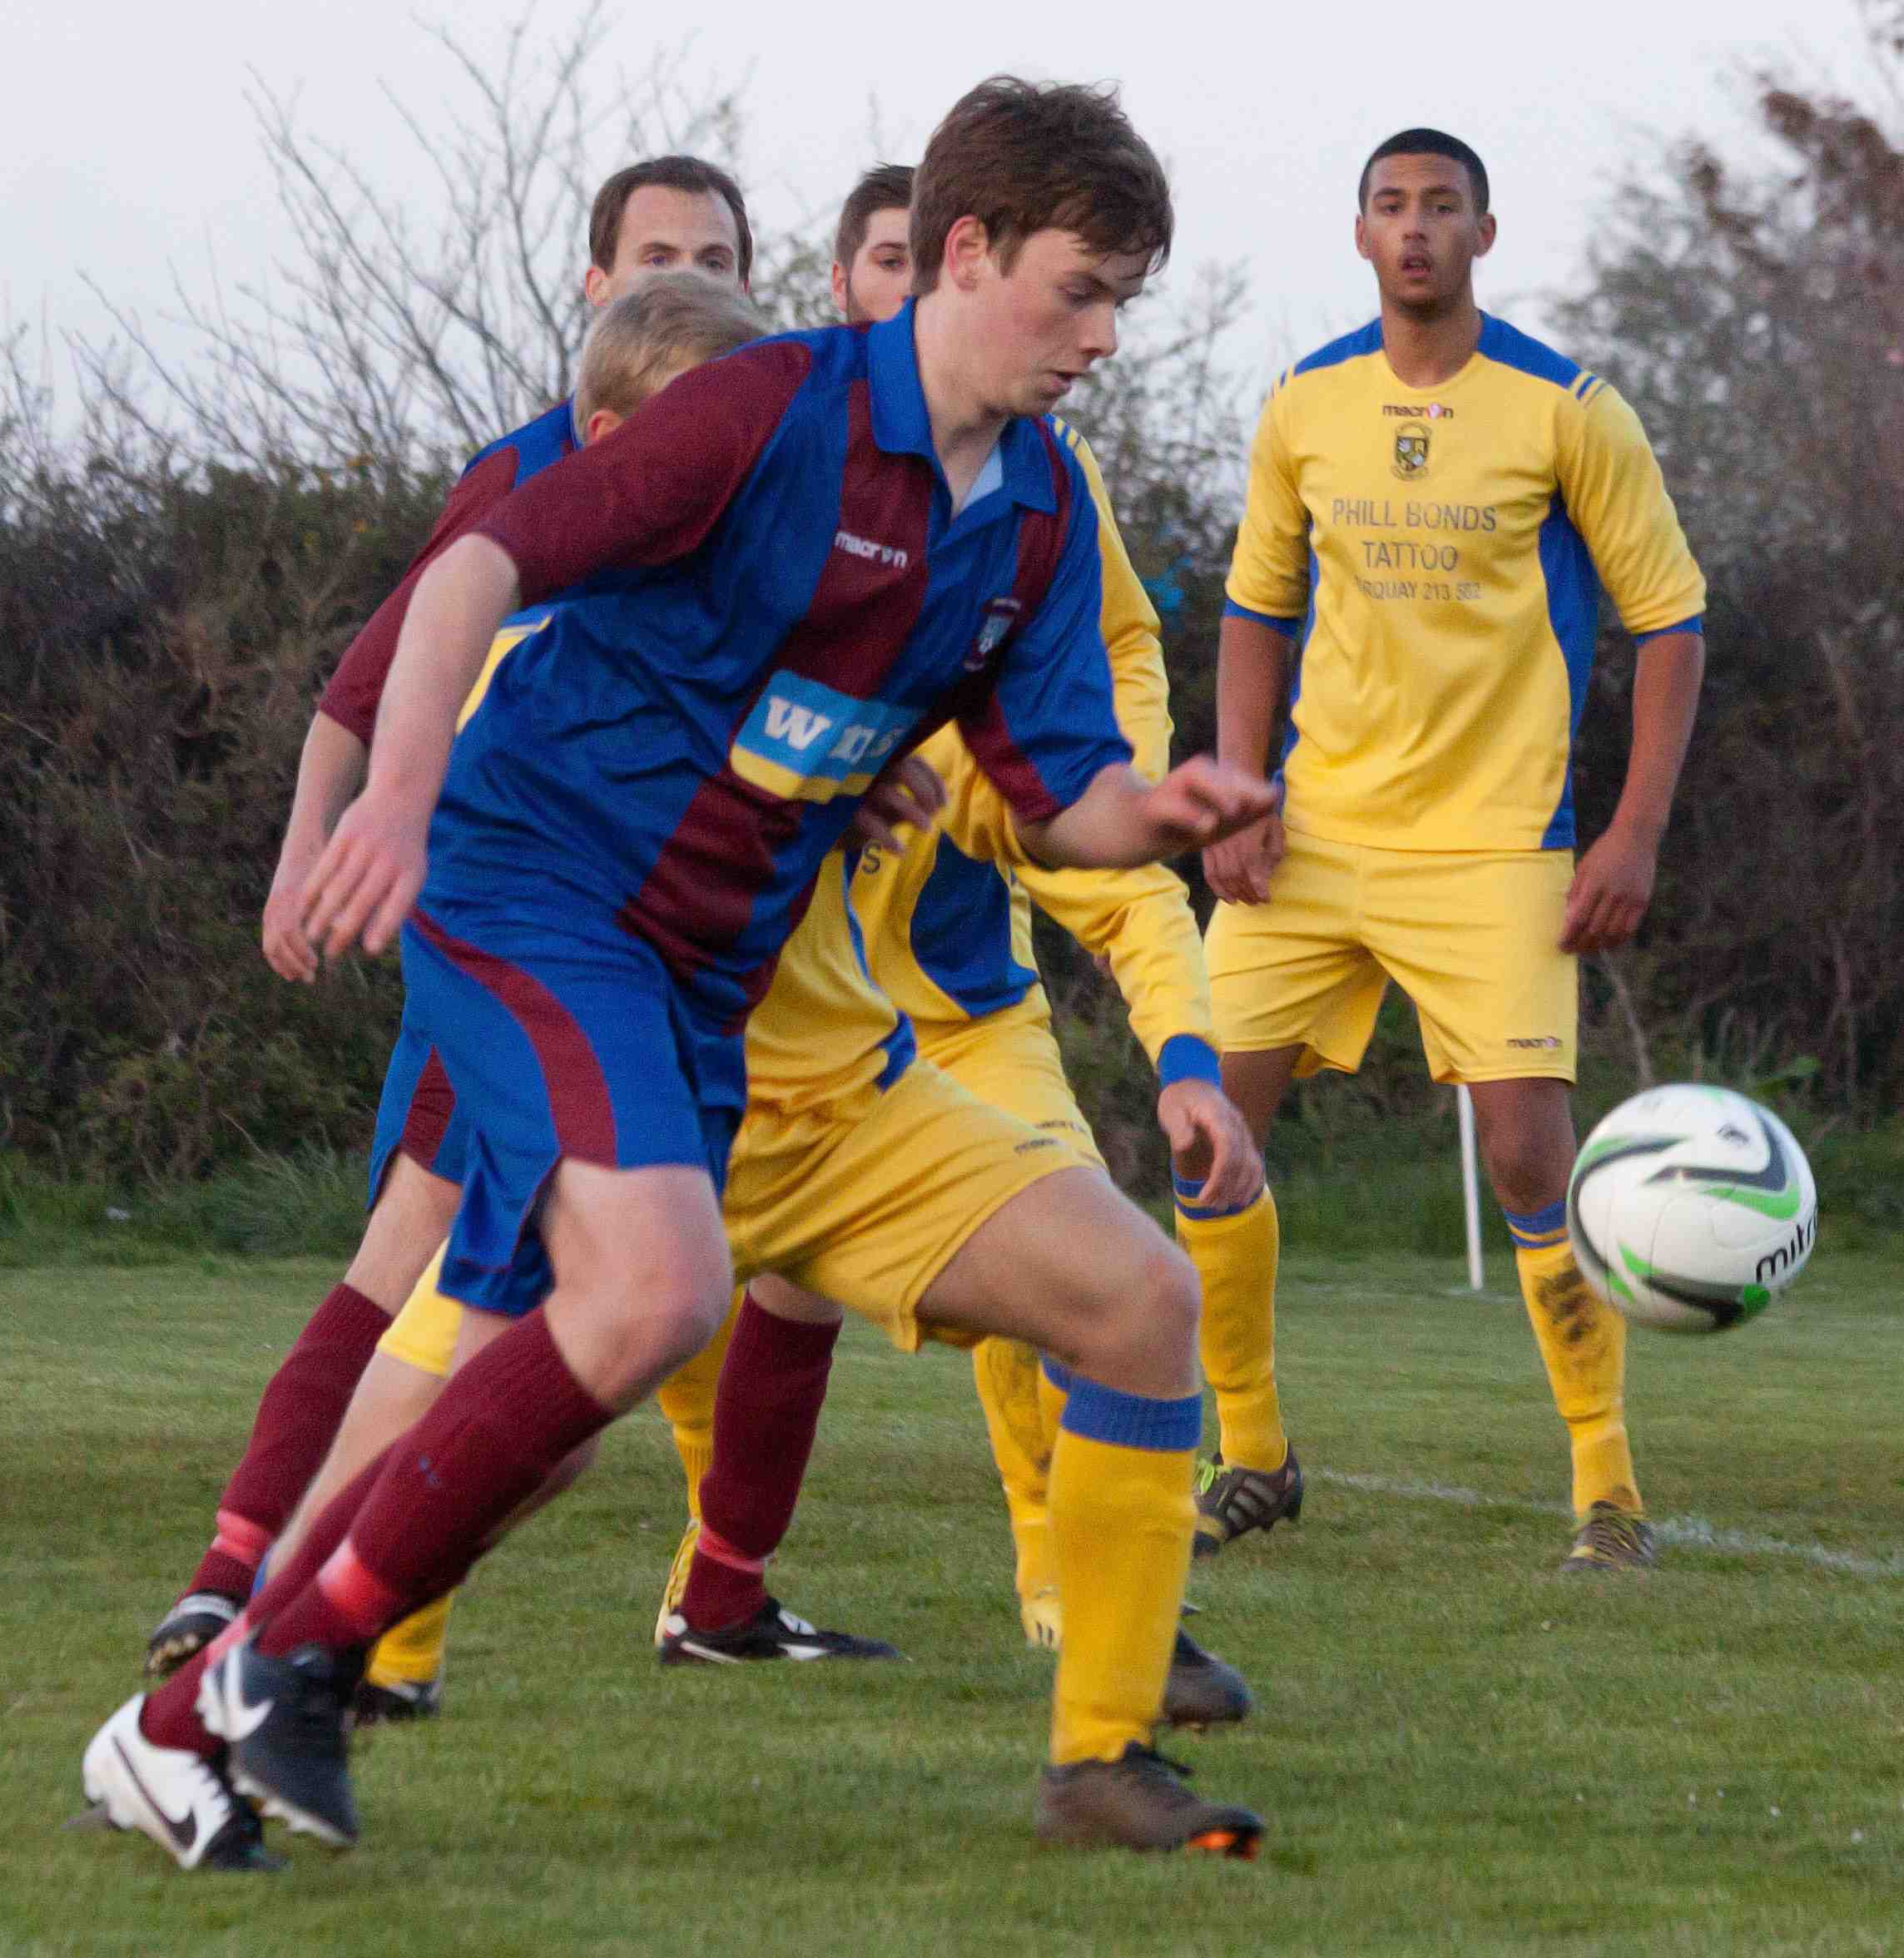 Stoke Gabriel Reserves Buckland Athletic Reserves Herald Cup semi-final 2014